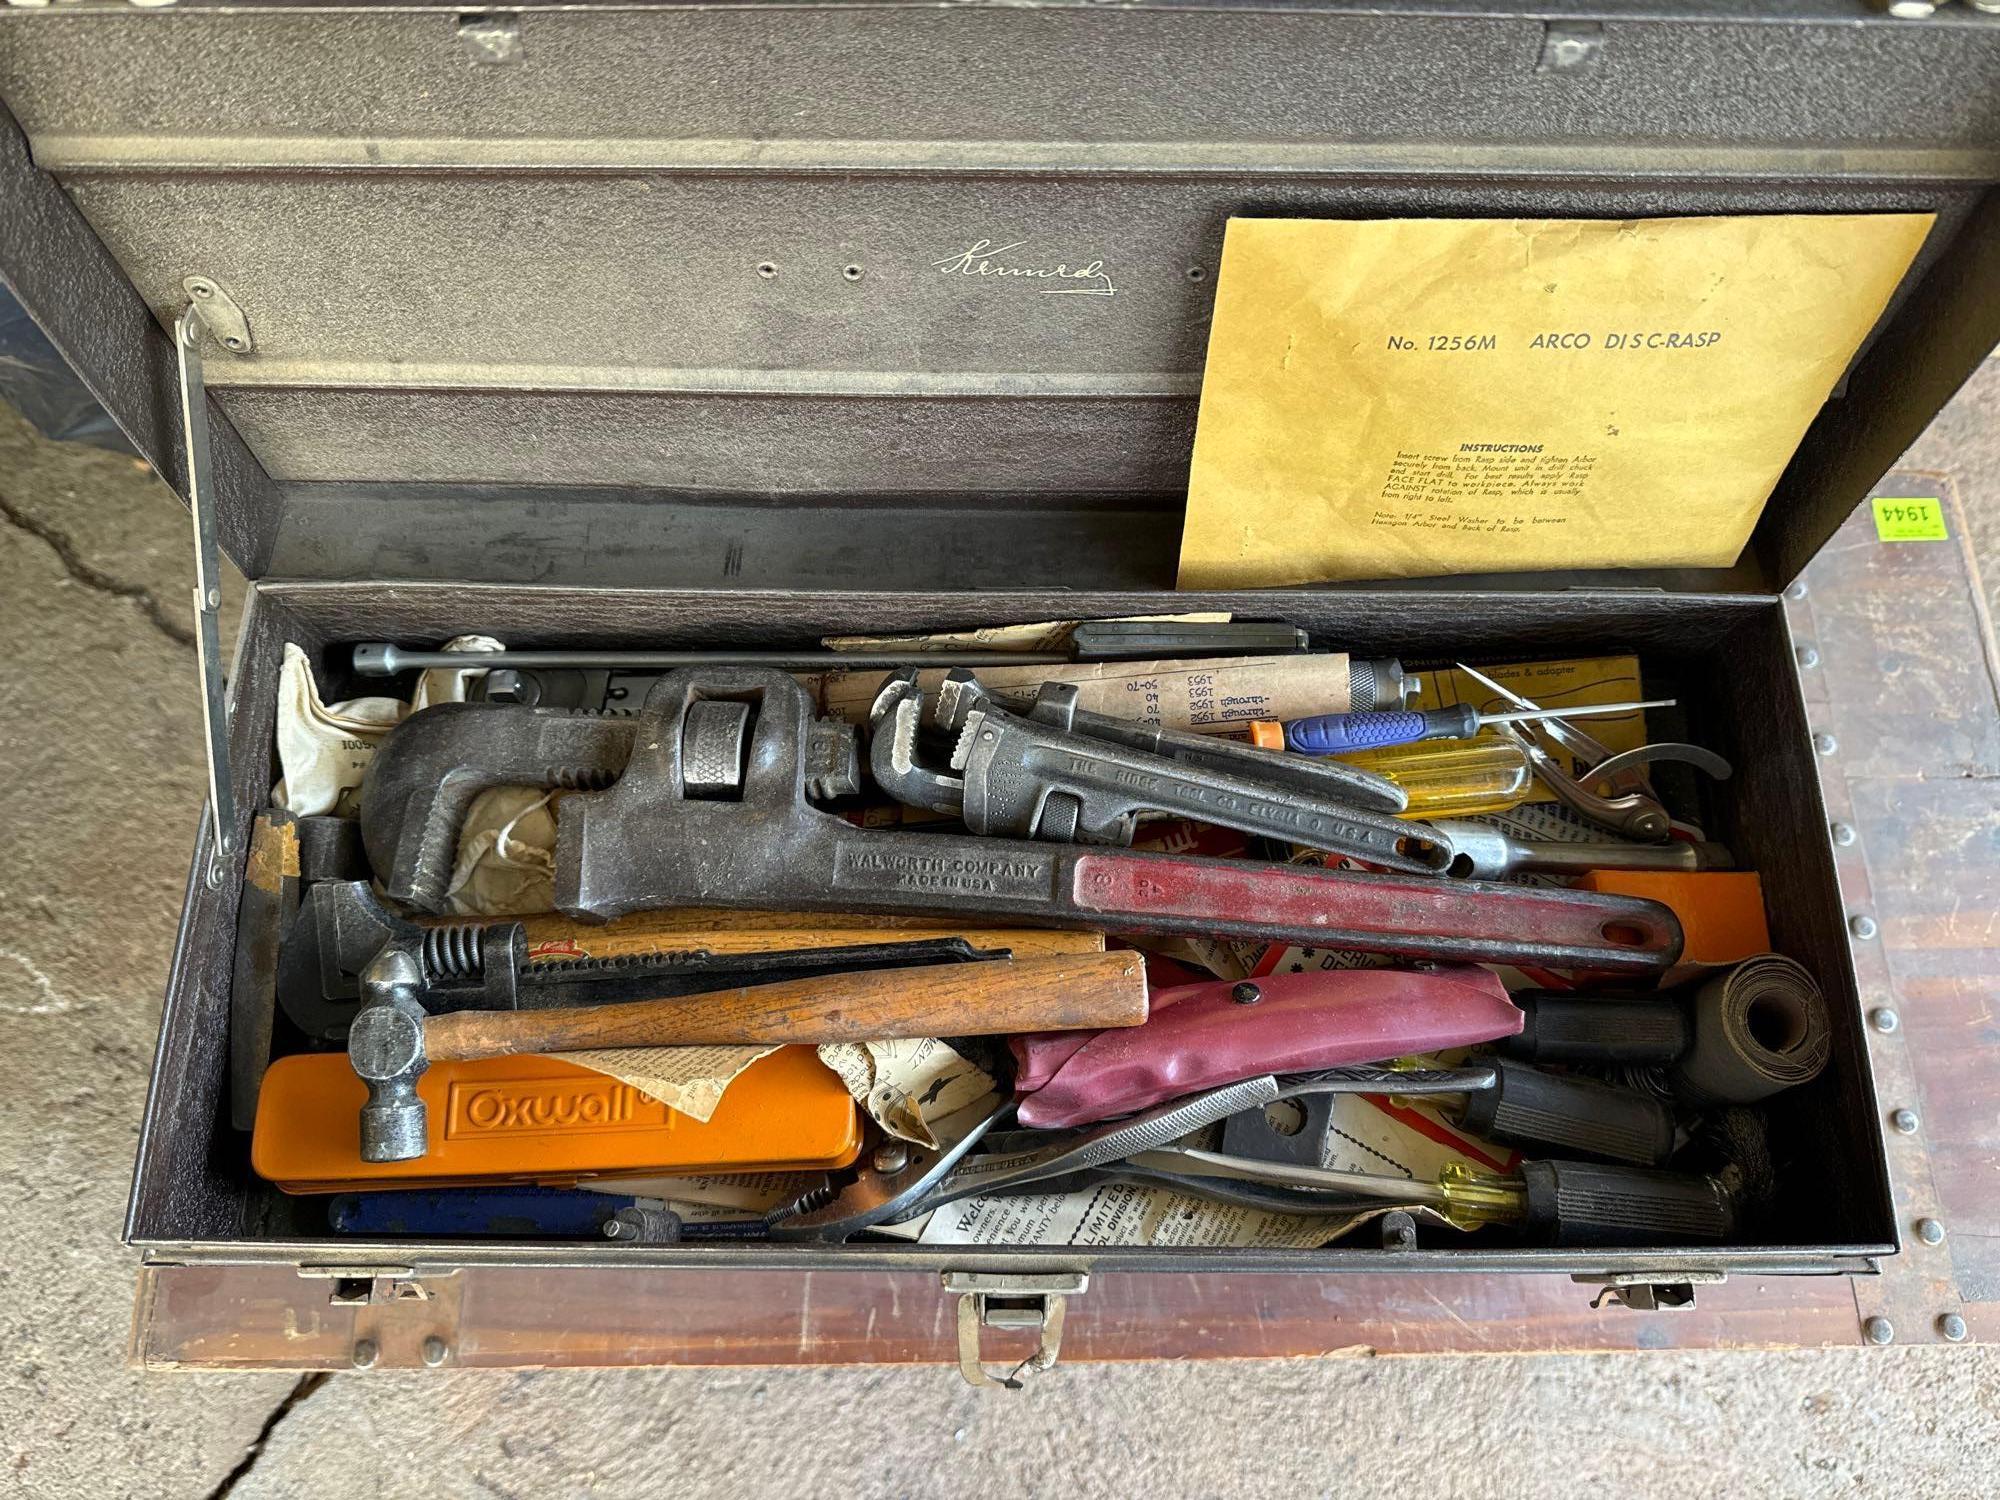 Vintage Kennedy Tool Box with Tools